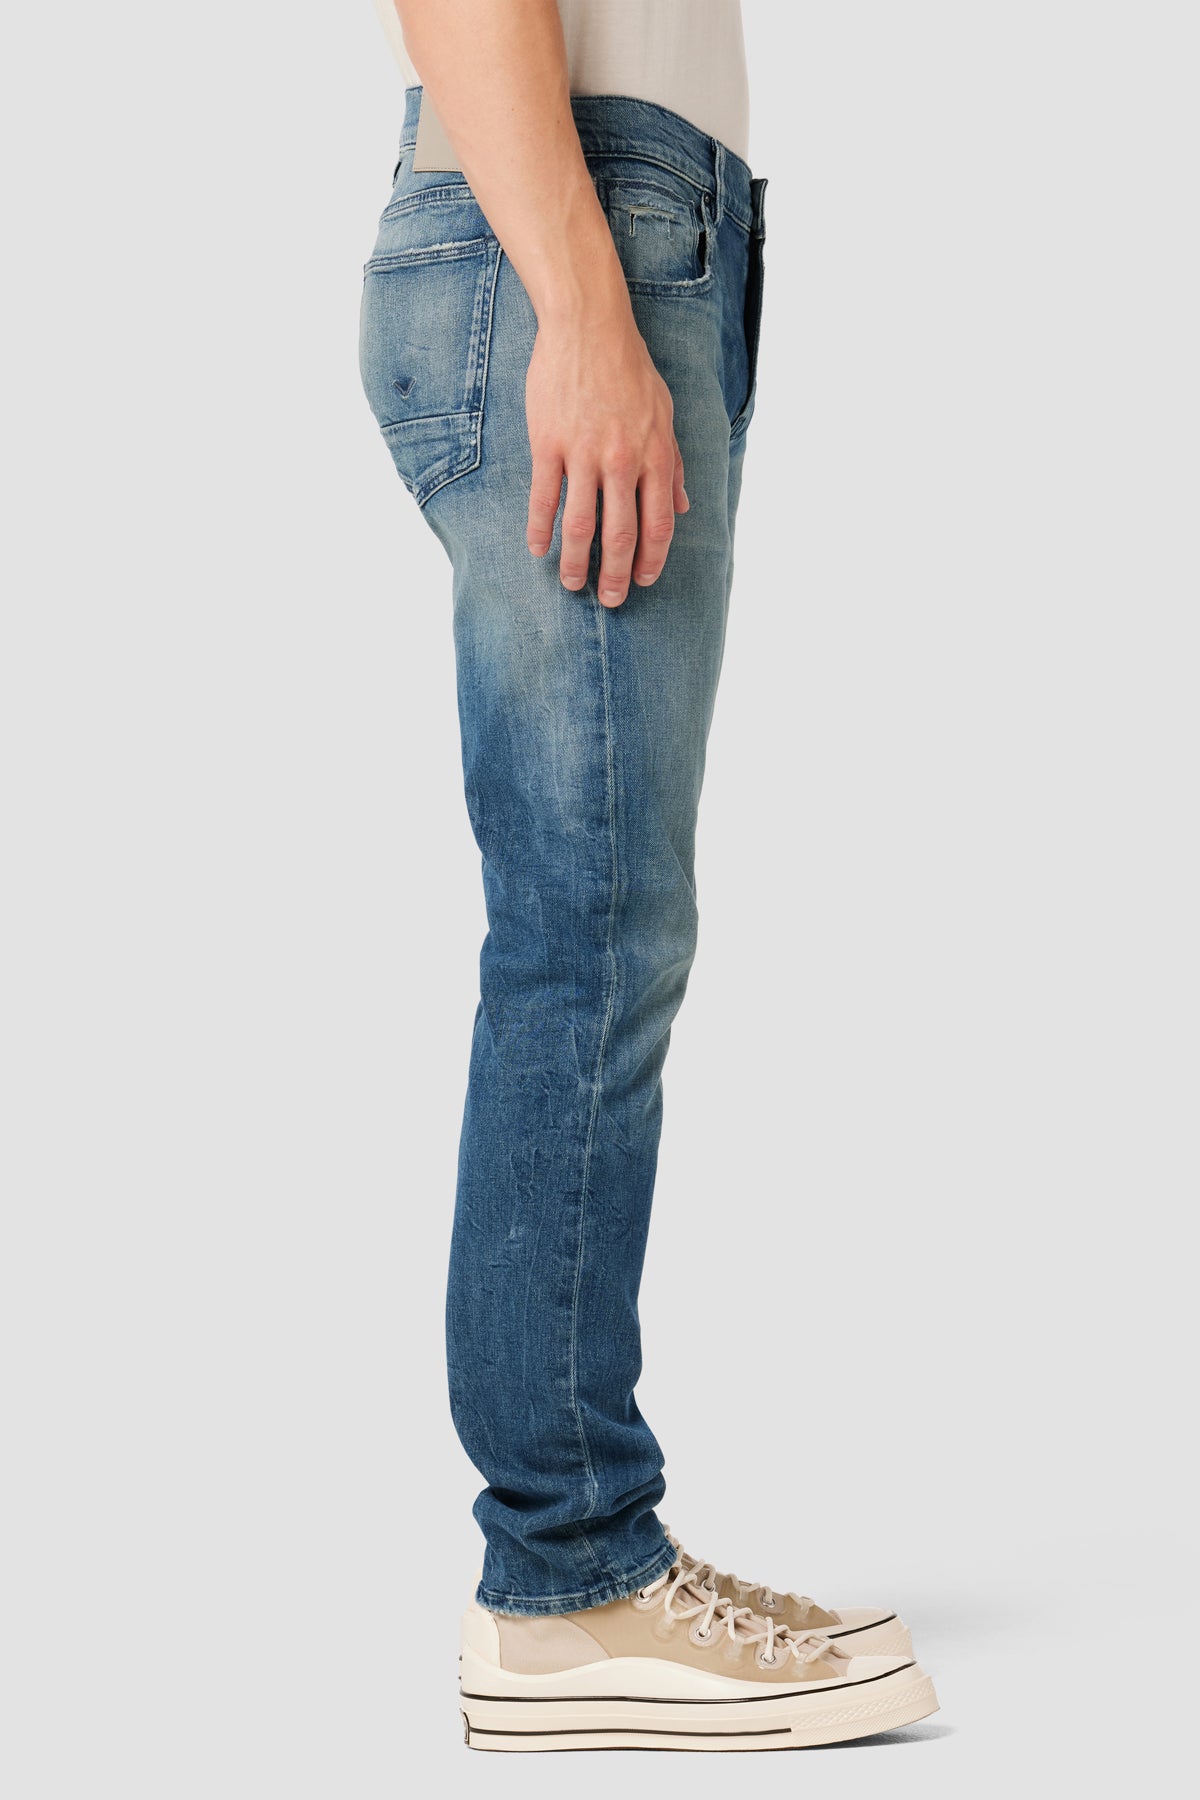 We will the Blake Slim Jean Hudson suitable for and our team of experts